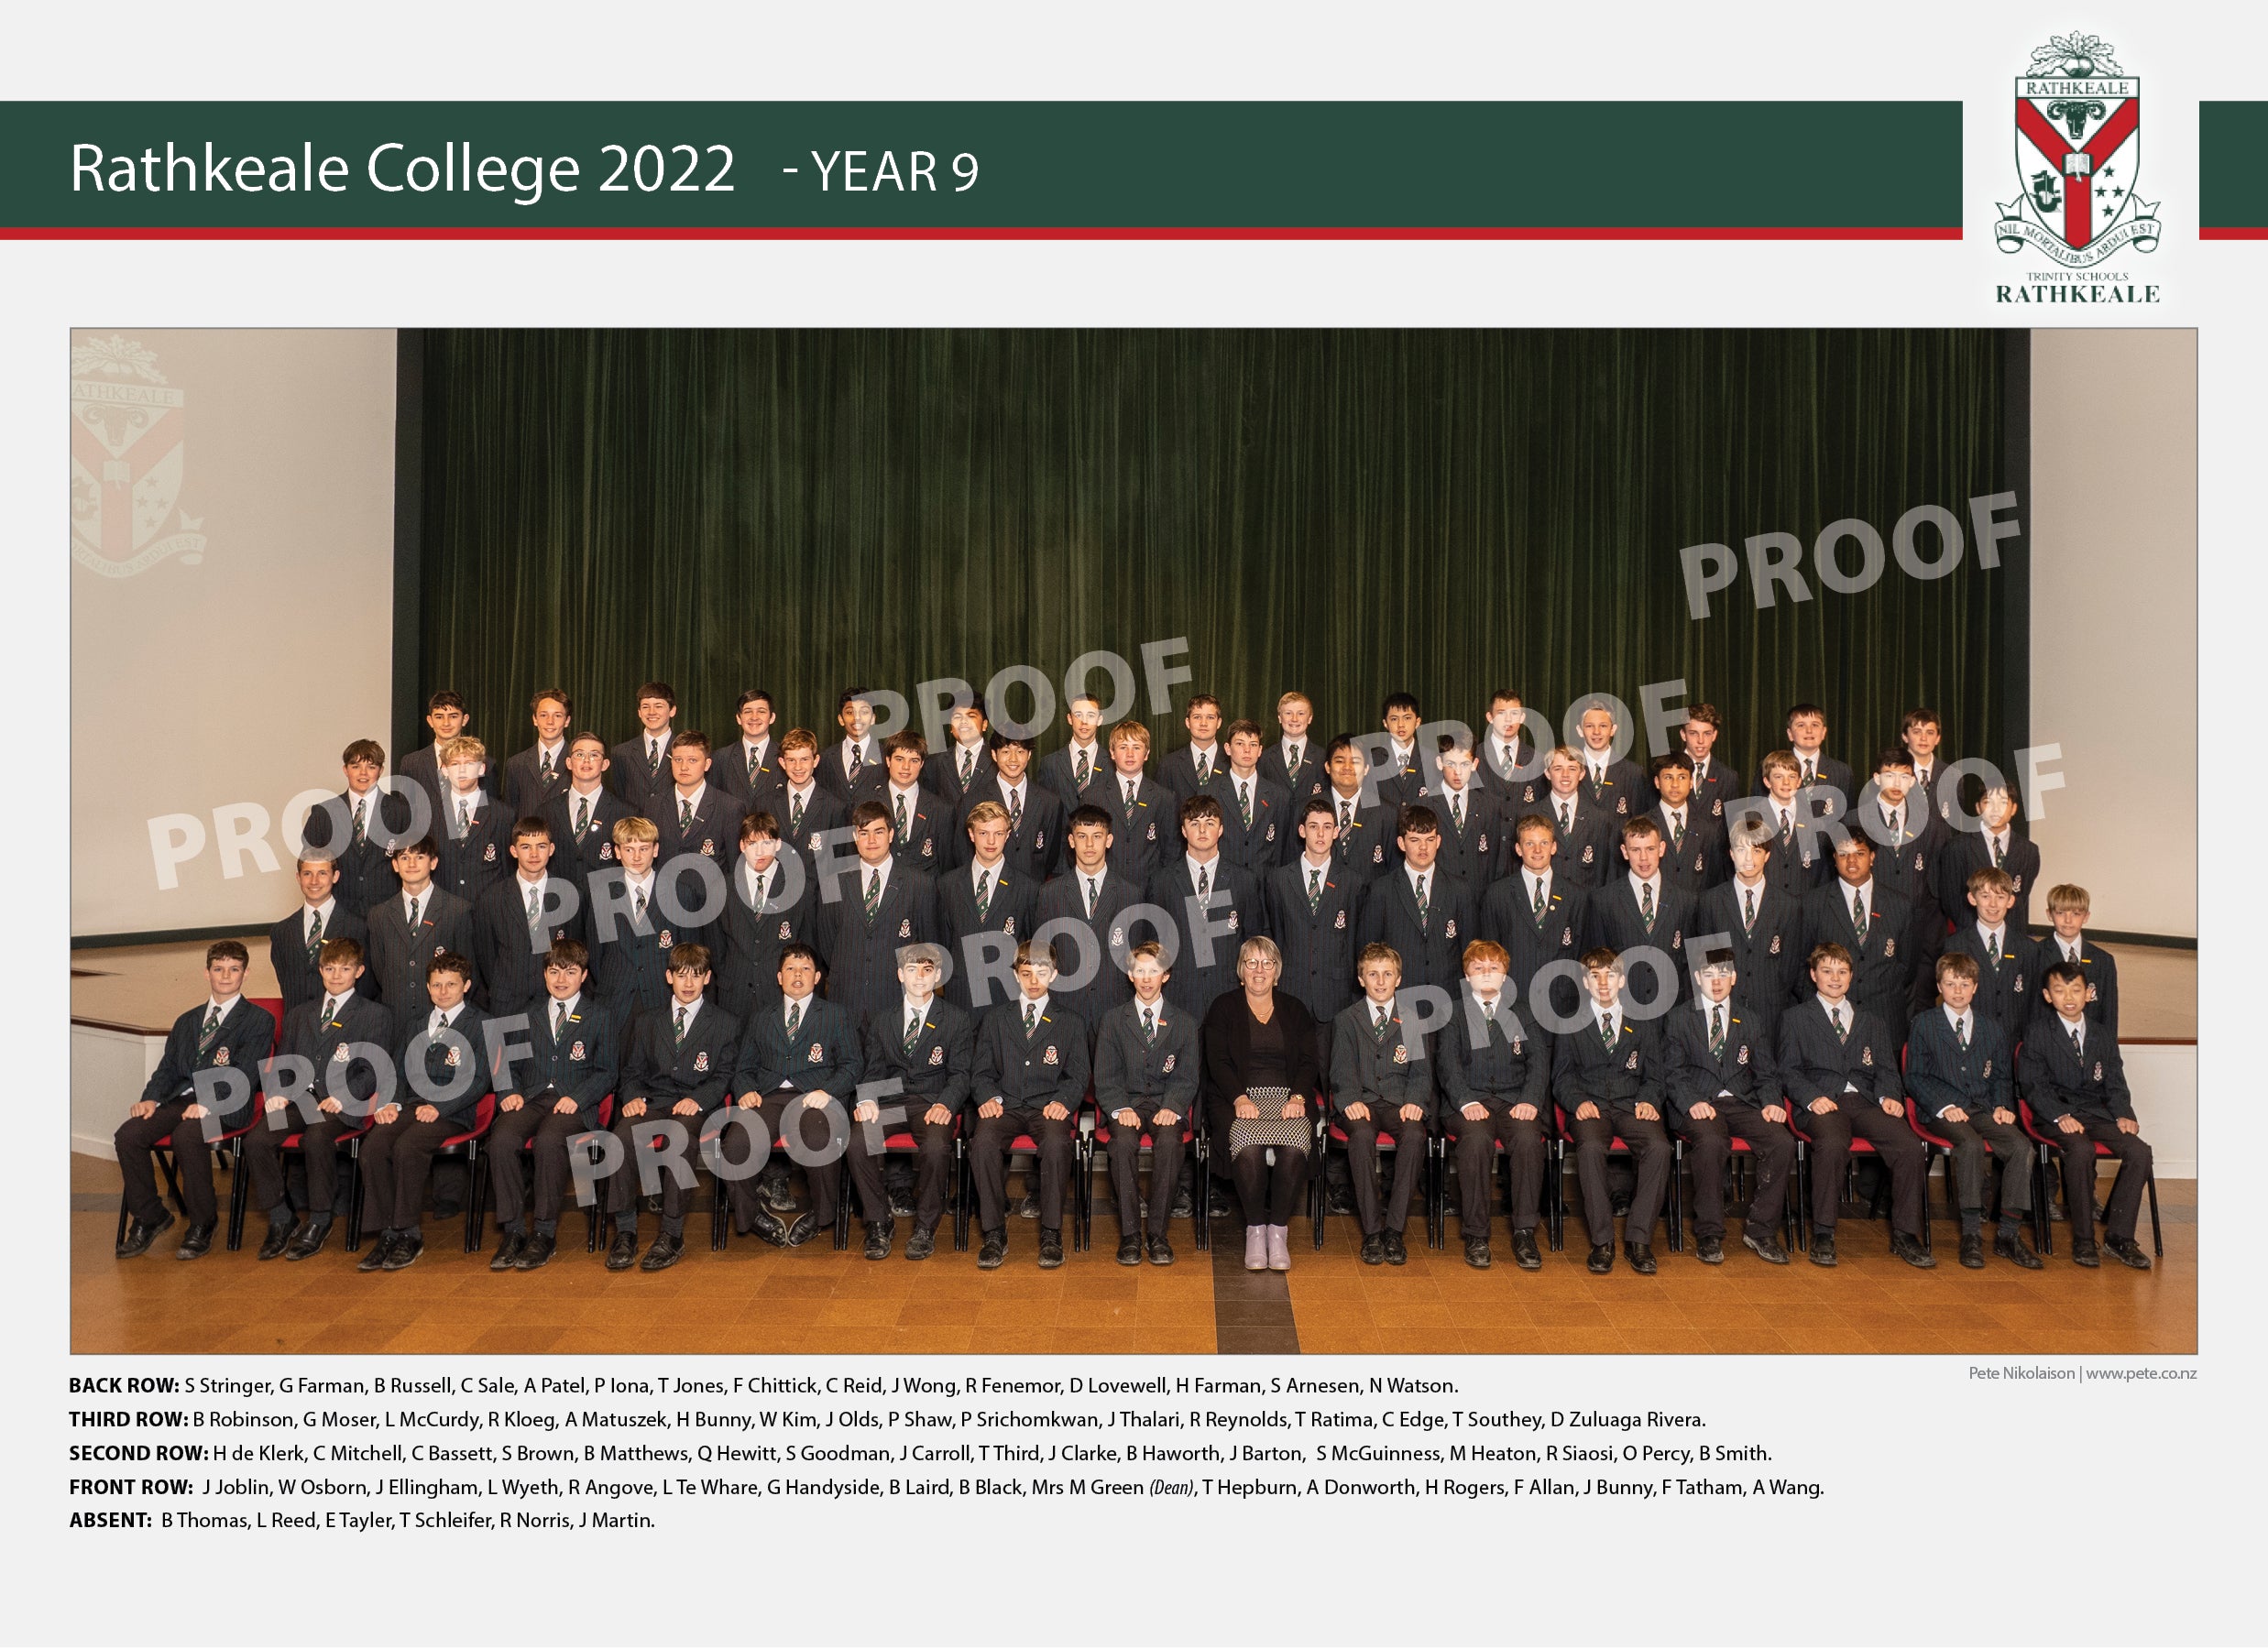 Year 9 - Rathkeale College 2022